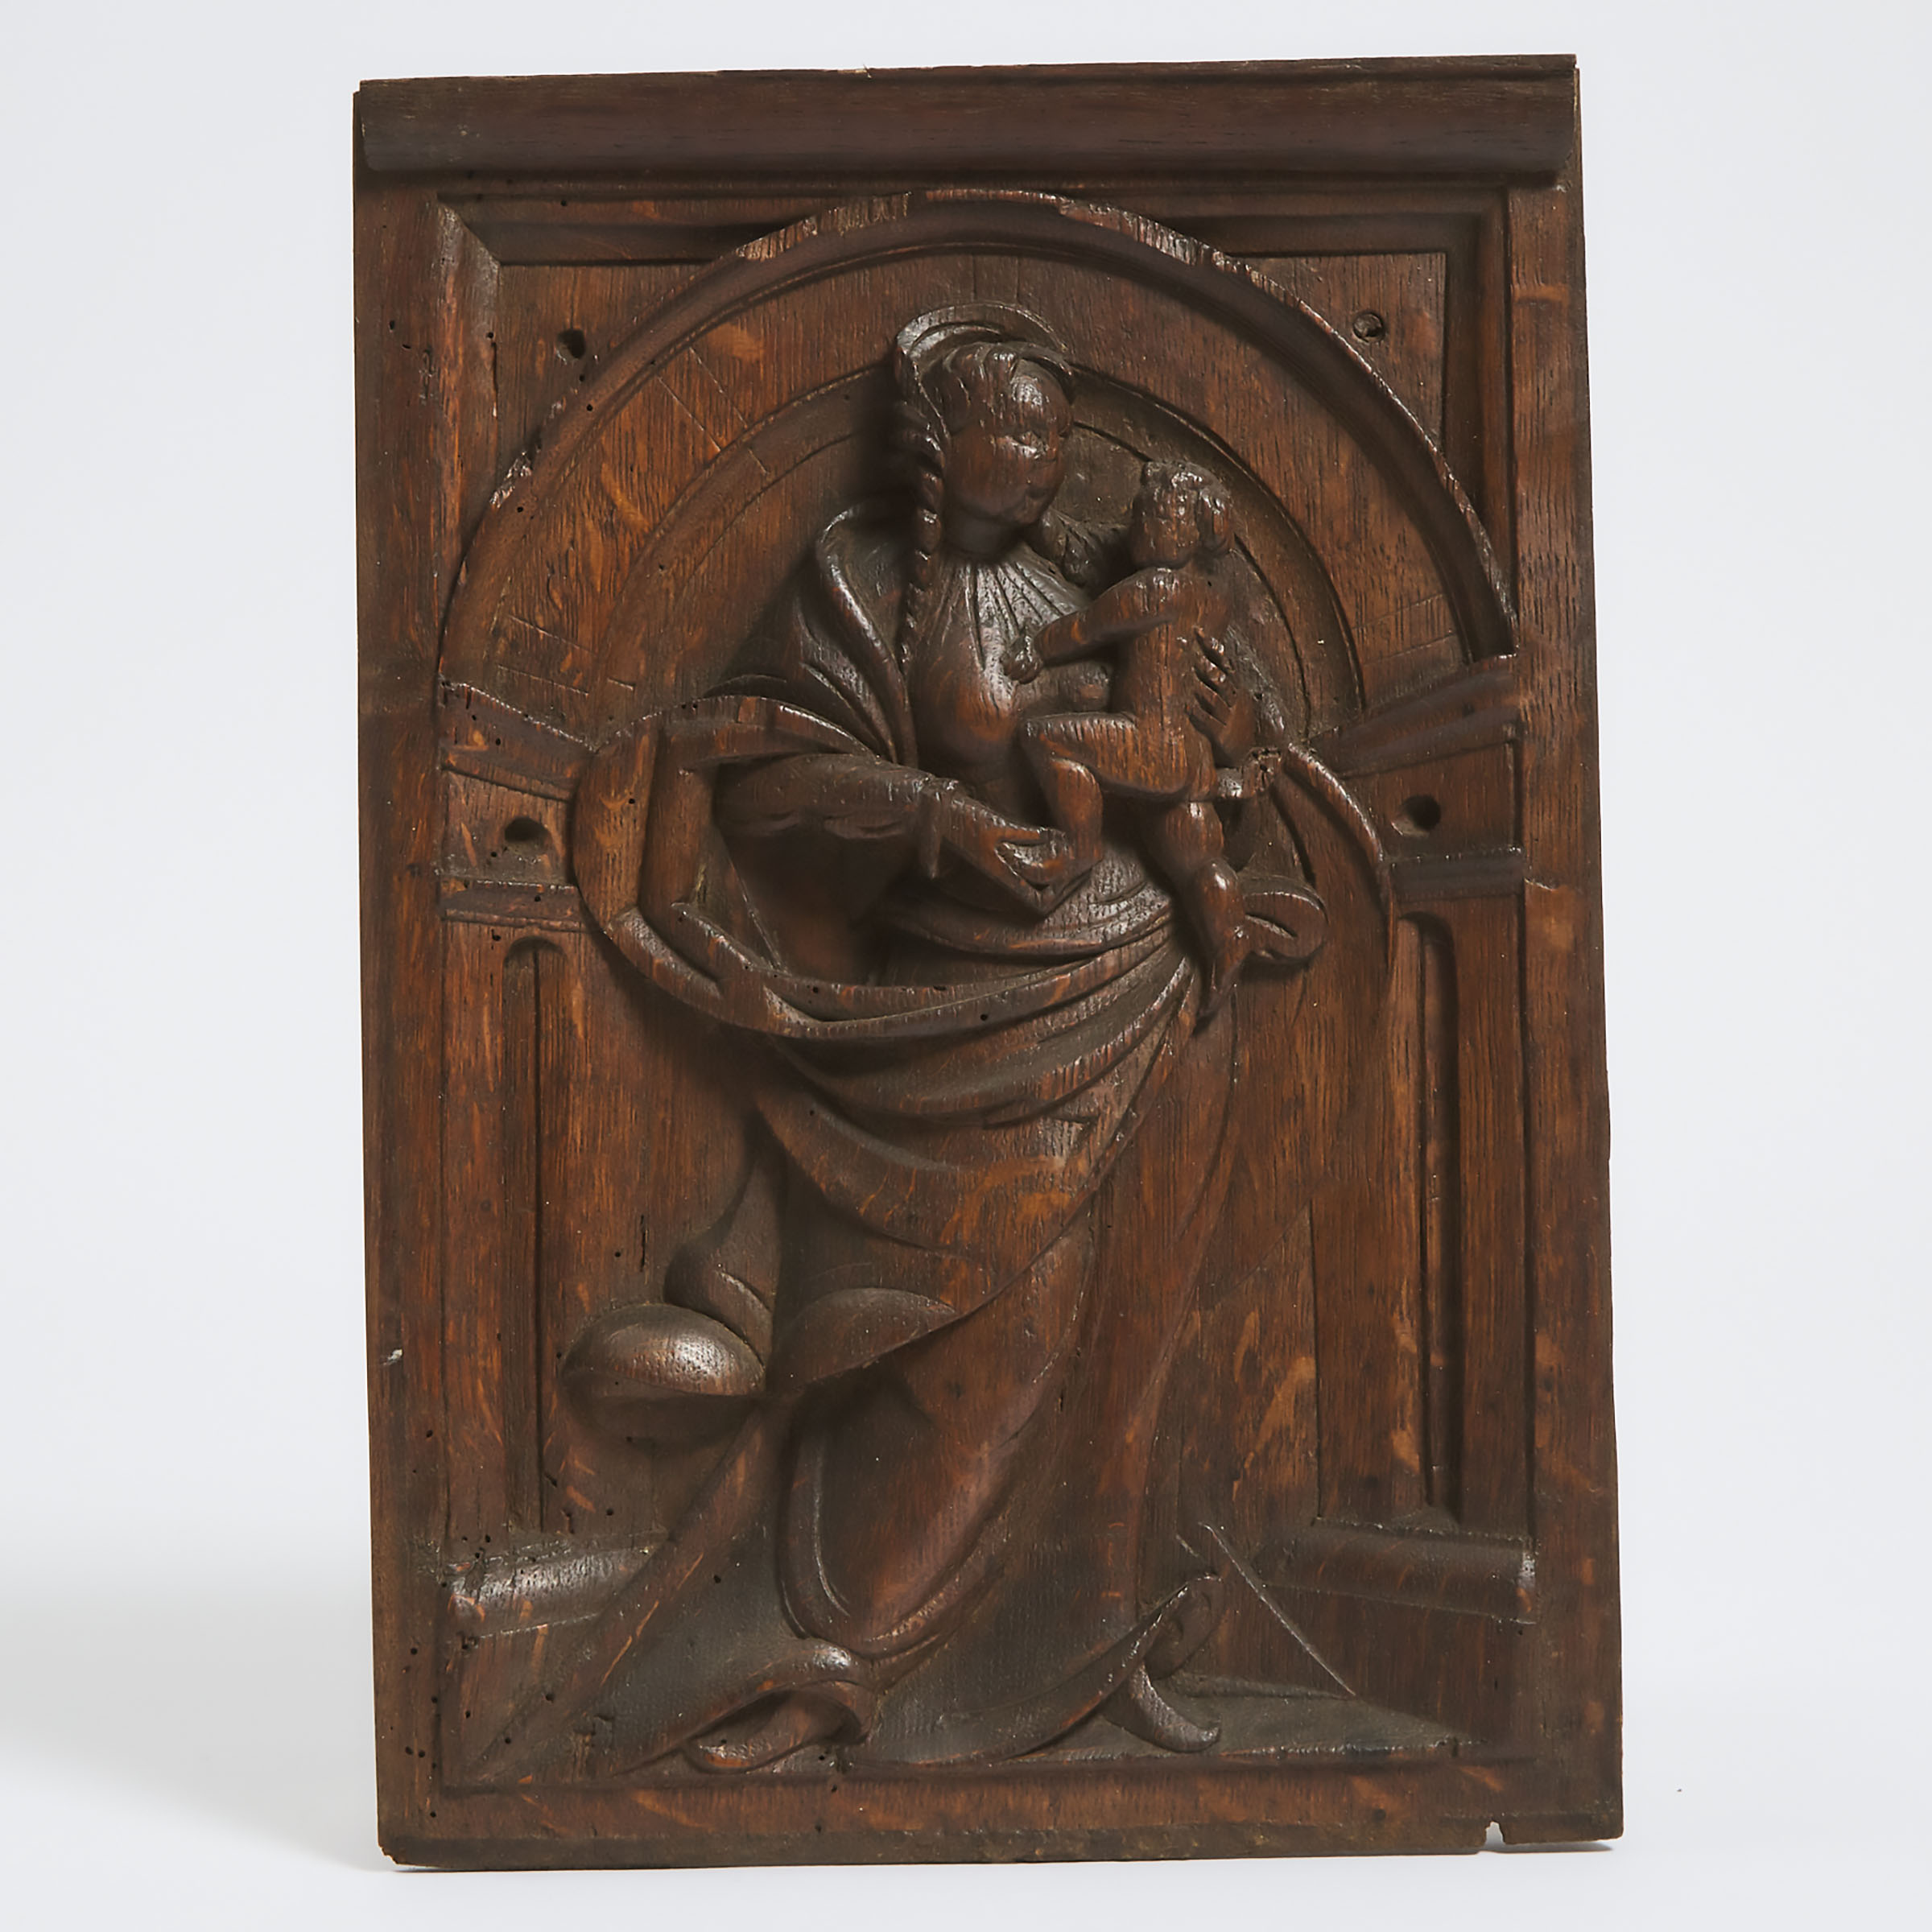 French Renaissance Relief Carved Oak Cupboard Panel of the Madonna and Child, 17th century